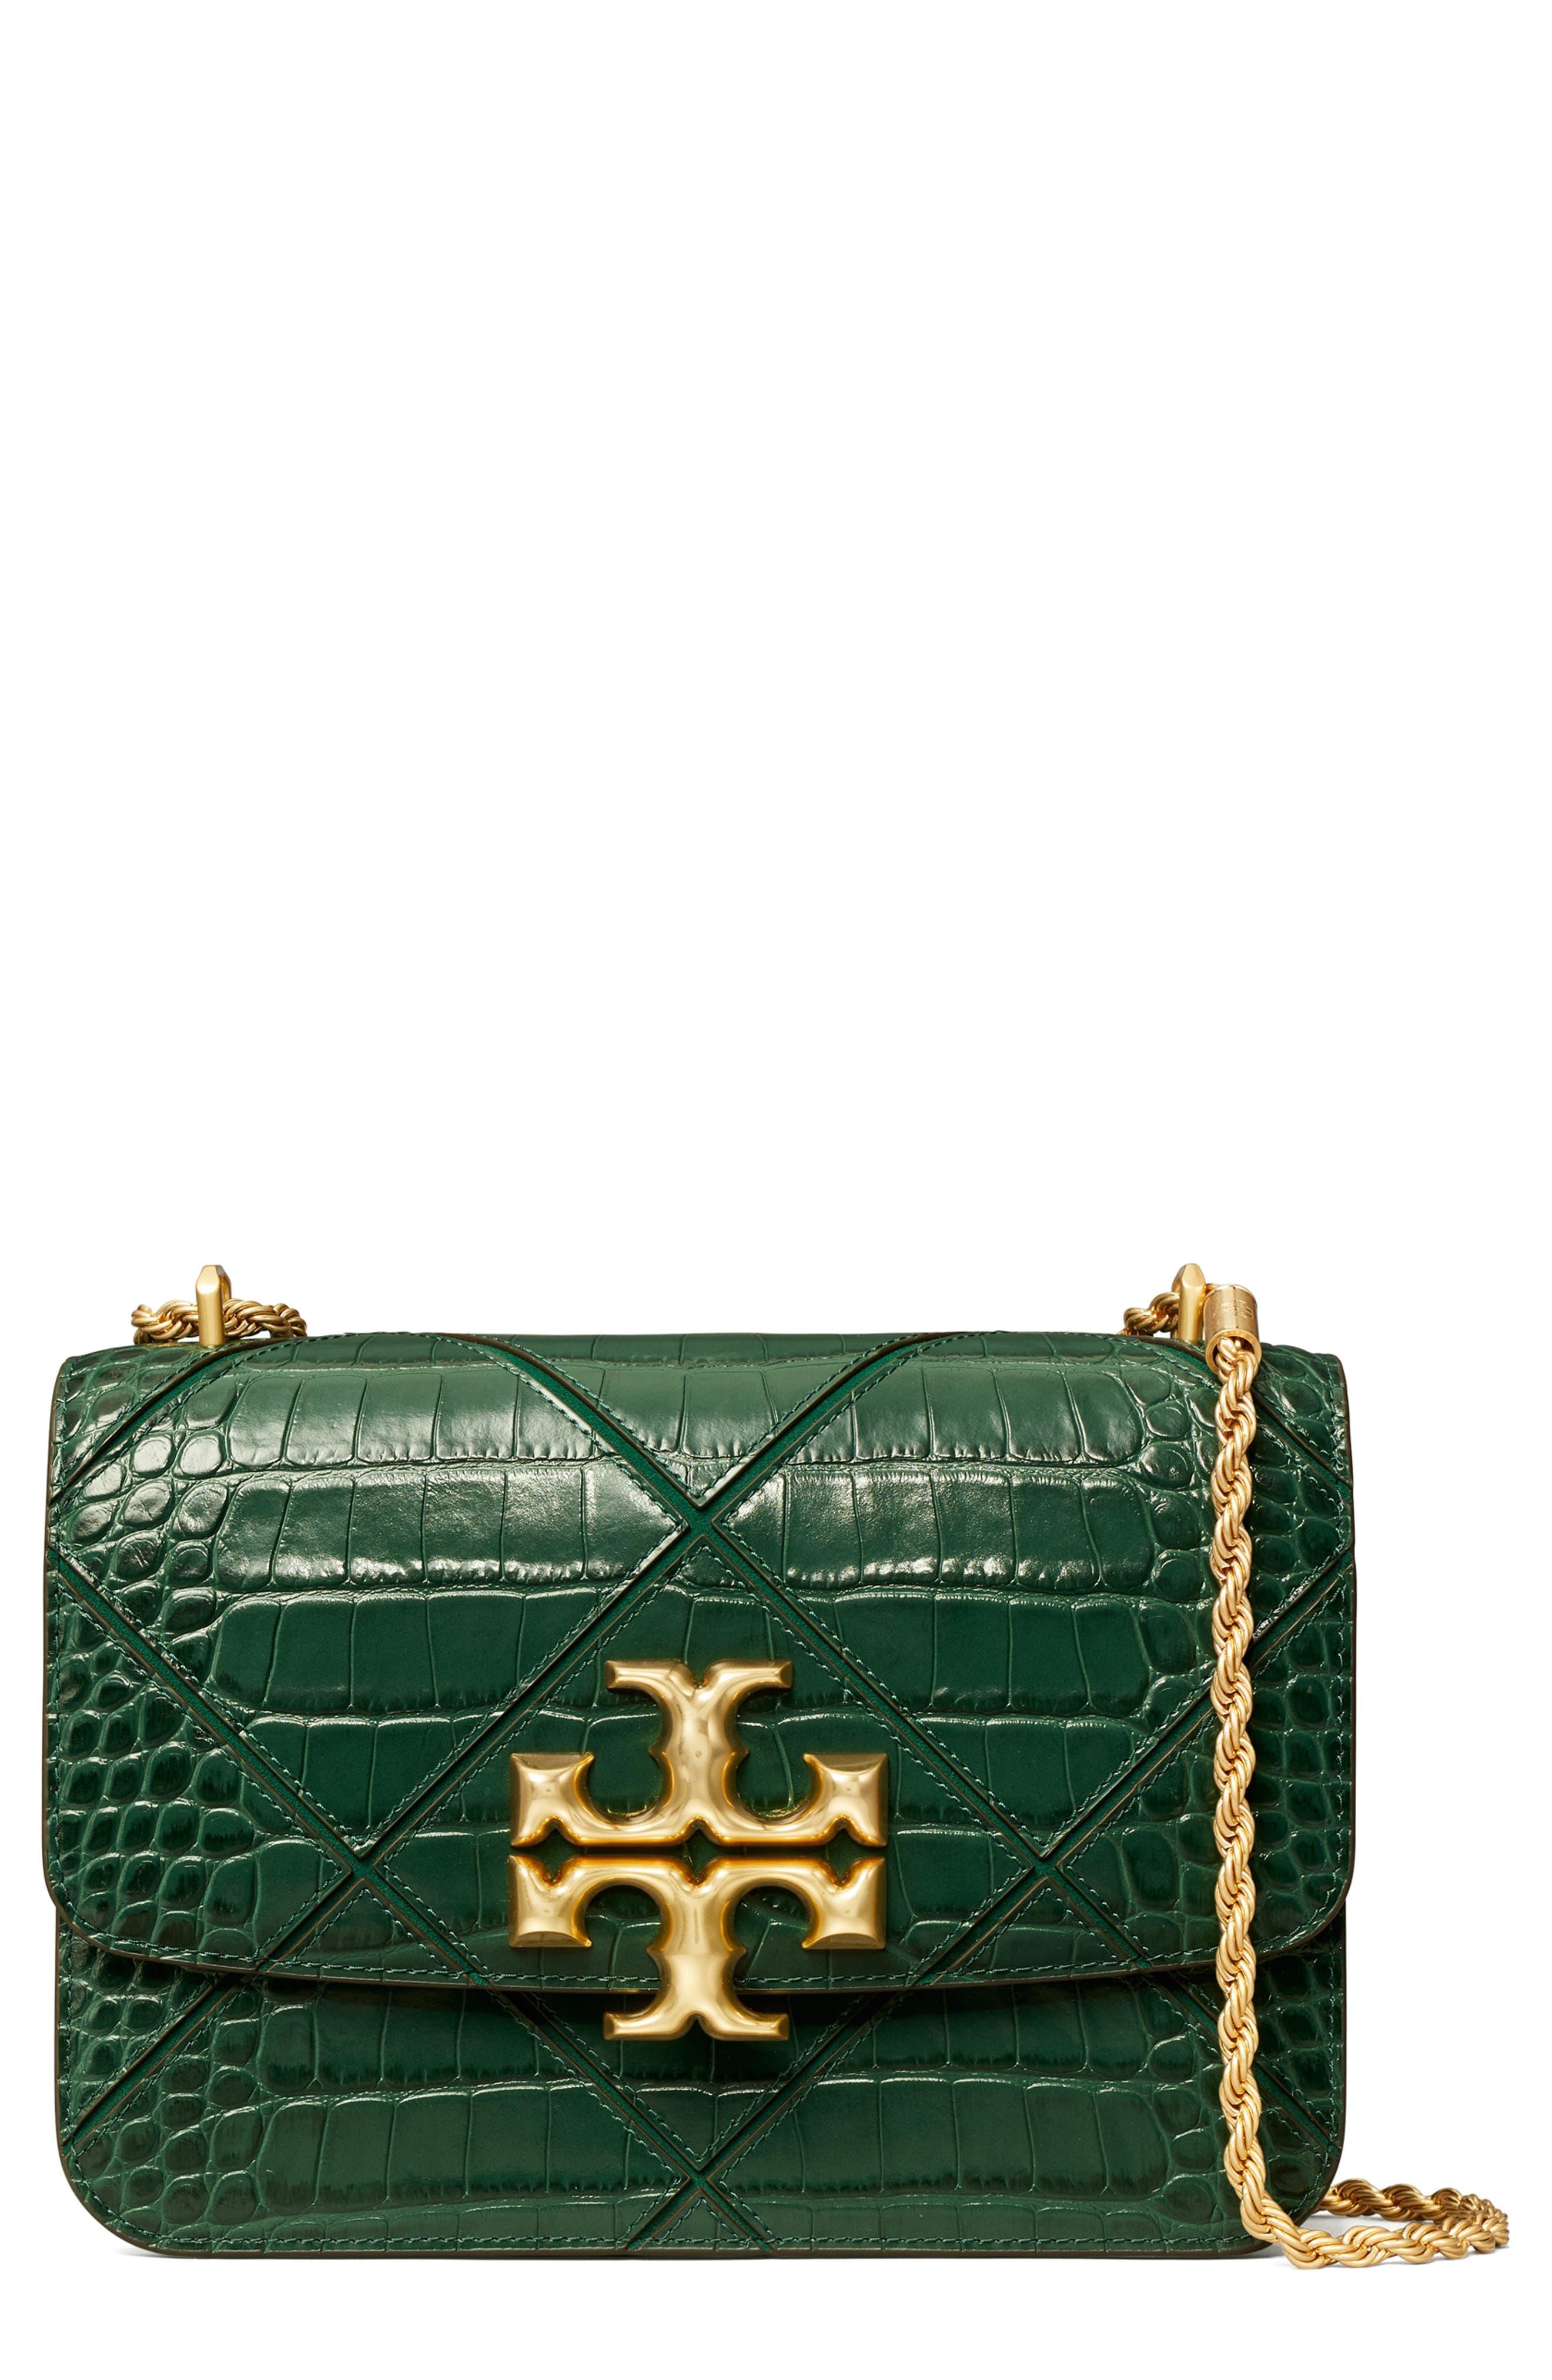 Tory Burch Eleanor Quilted Croc-embossed Leather Shoulder Bag in Green |  Lyst